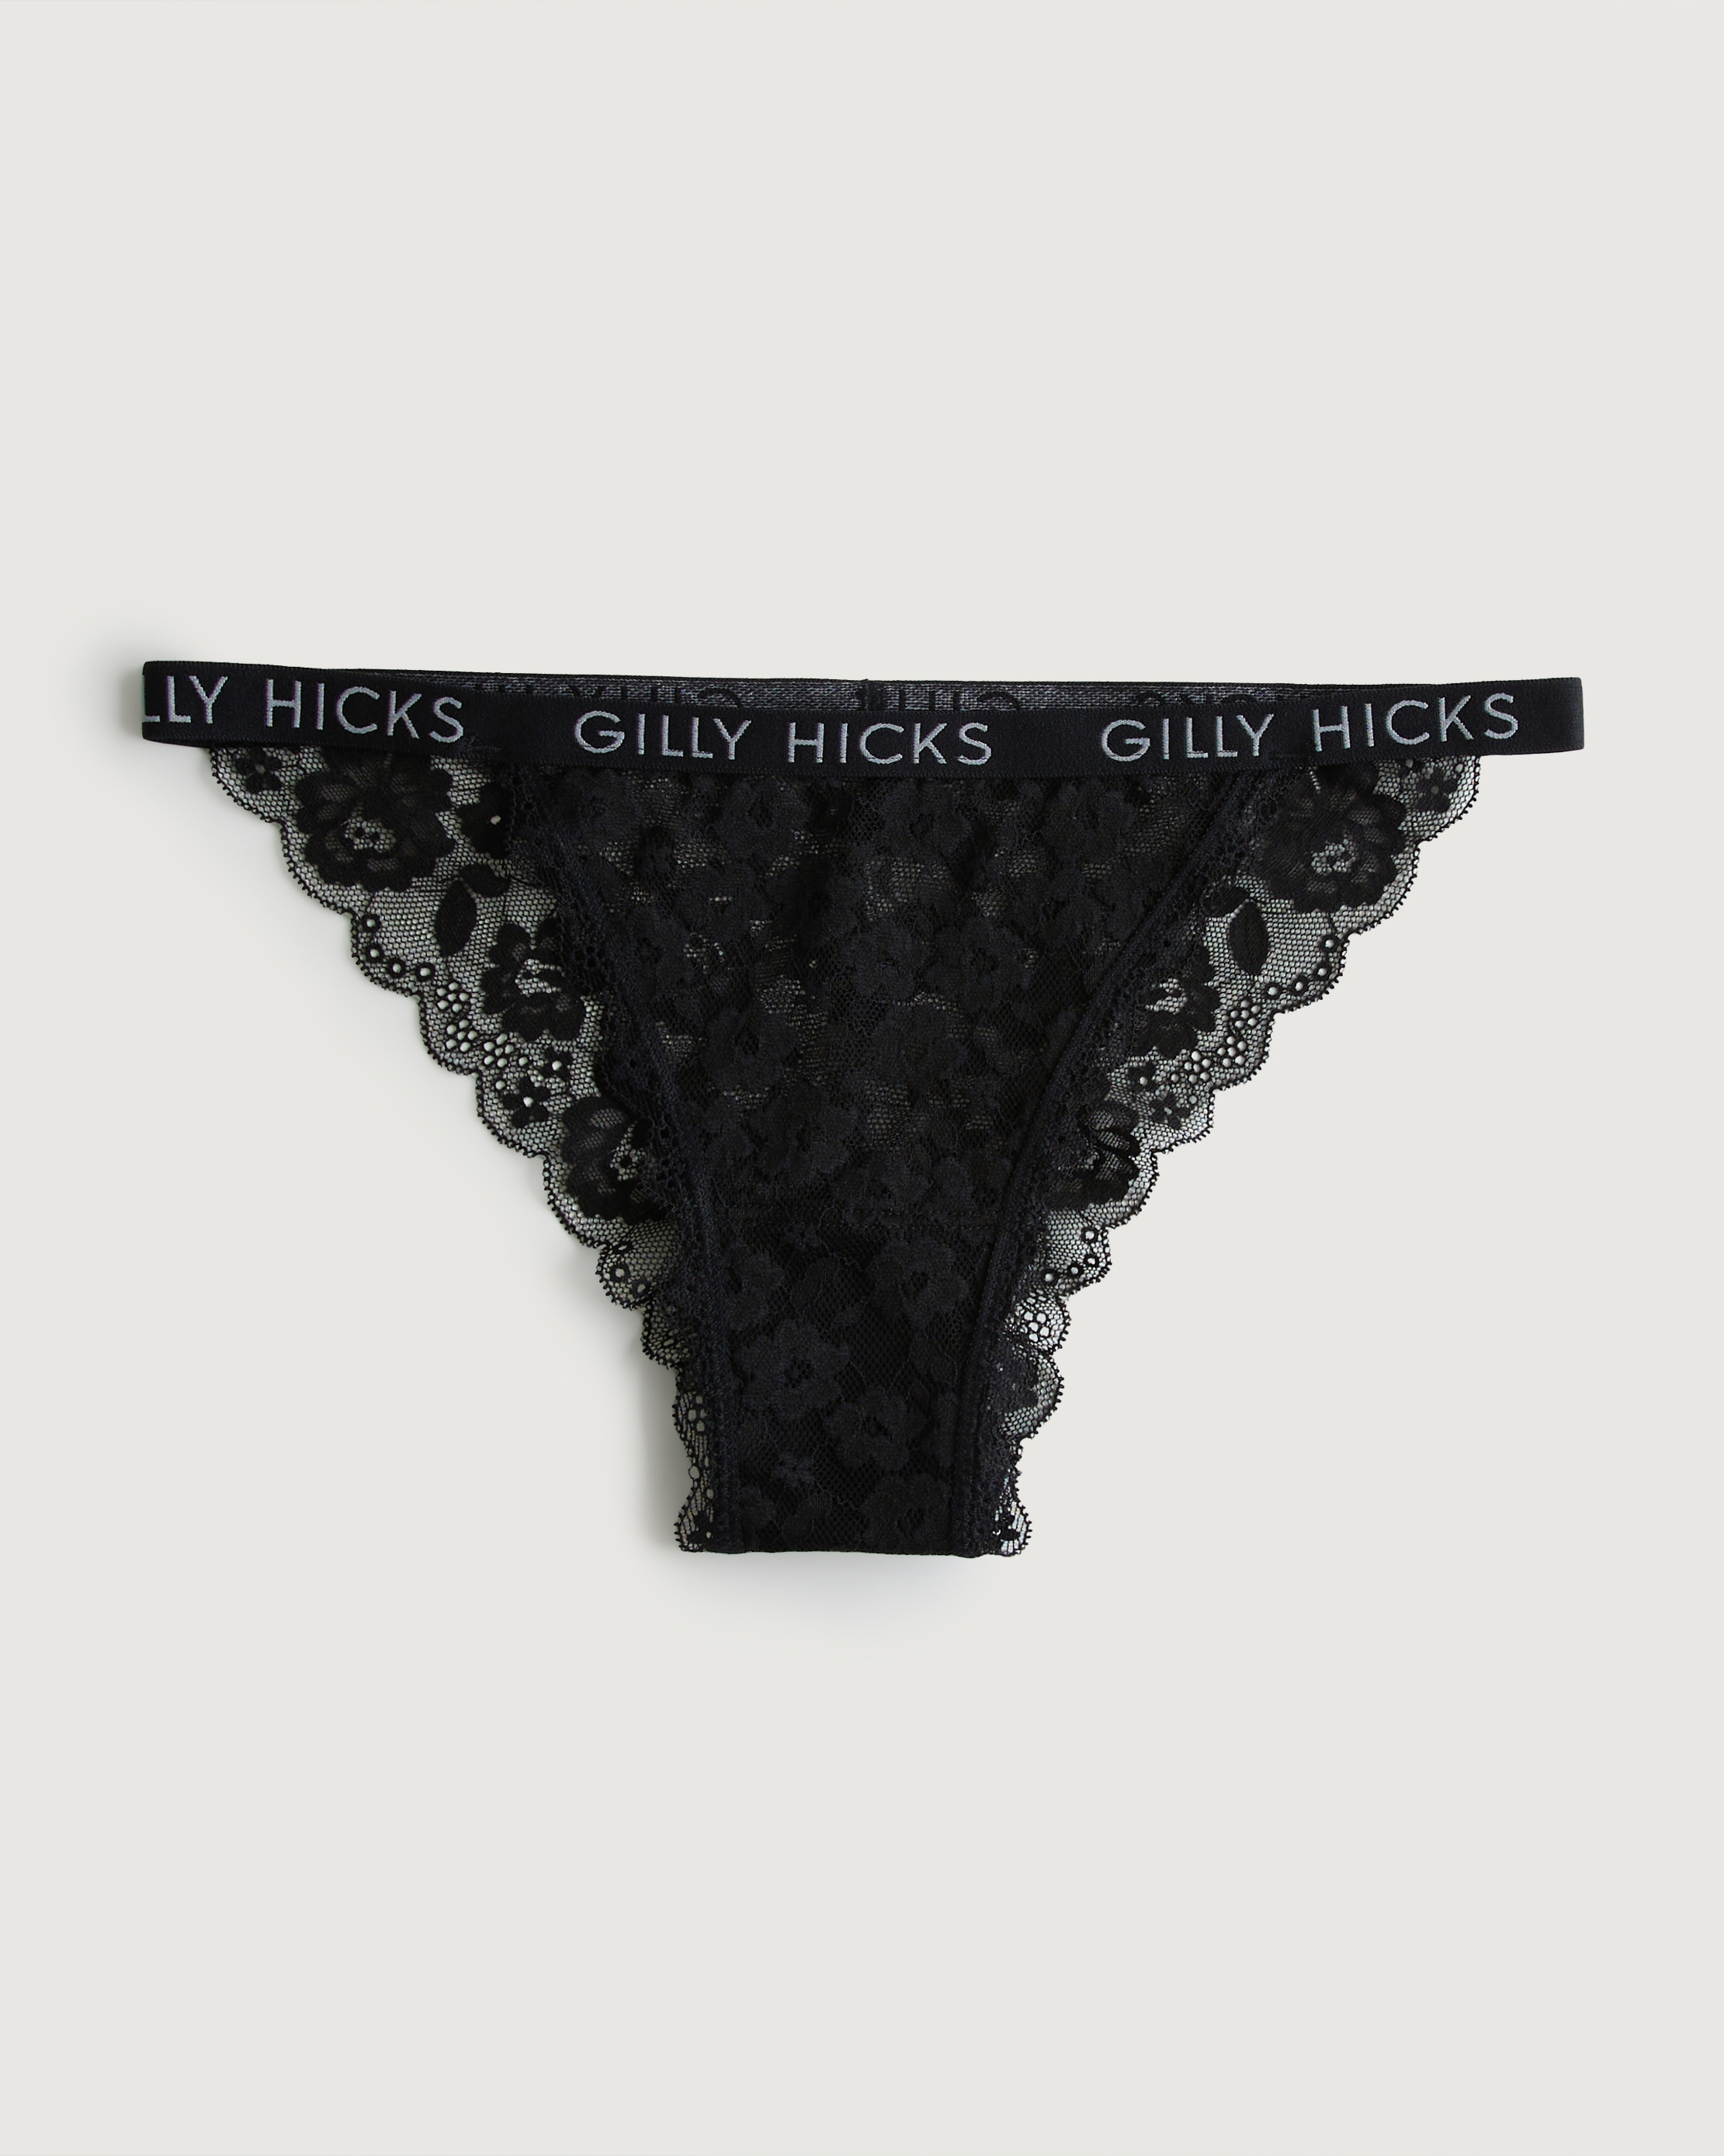 Hollister Revives Gilly Hicks as Potential Savior in Lingerie Form